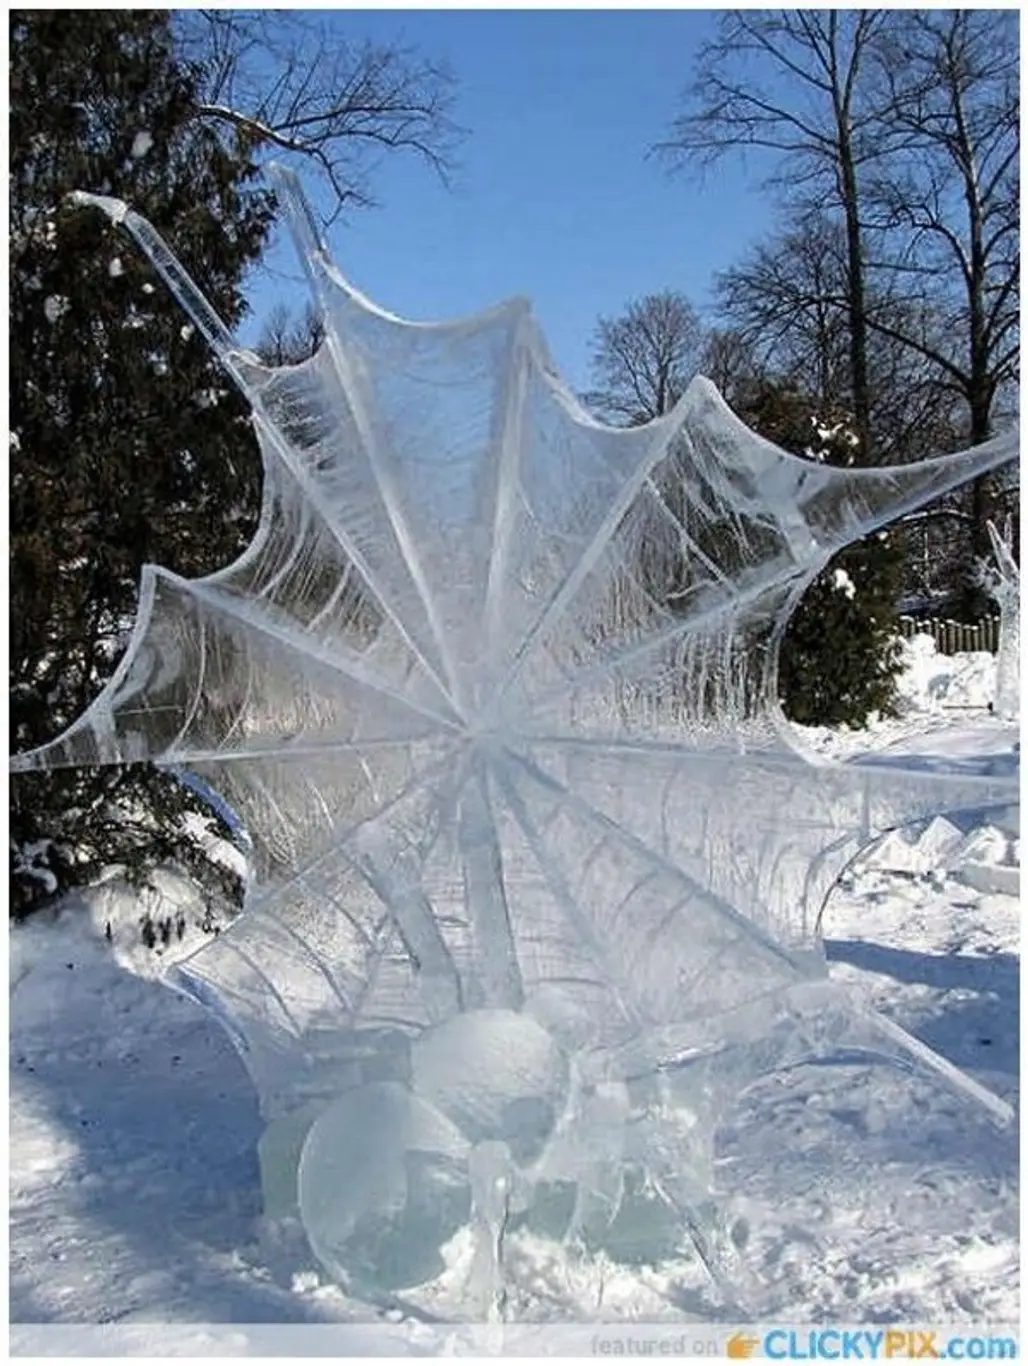 Ice-Sculpture - Spider with Web